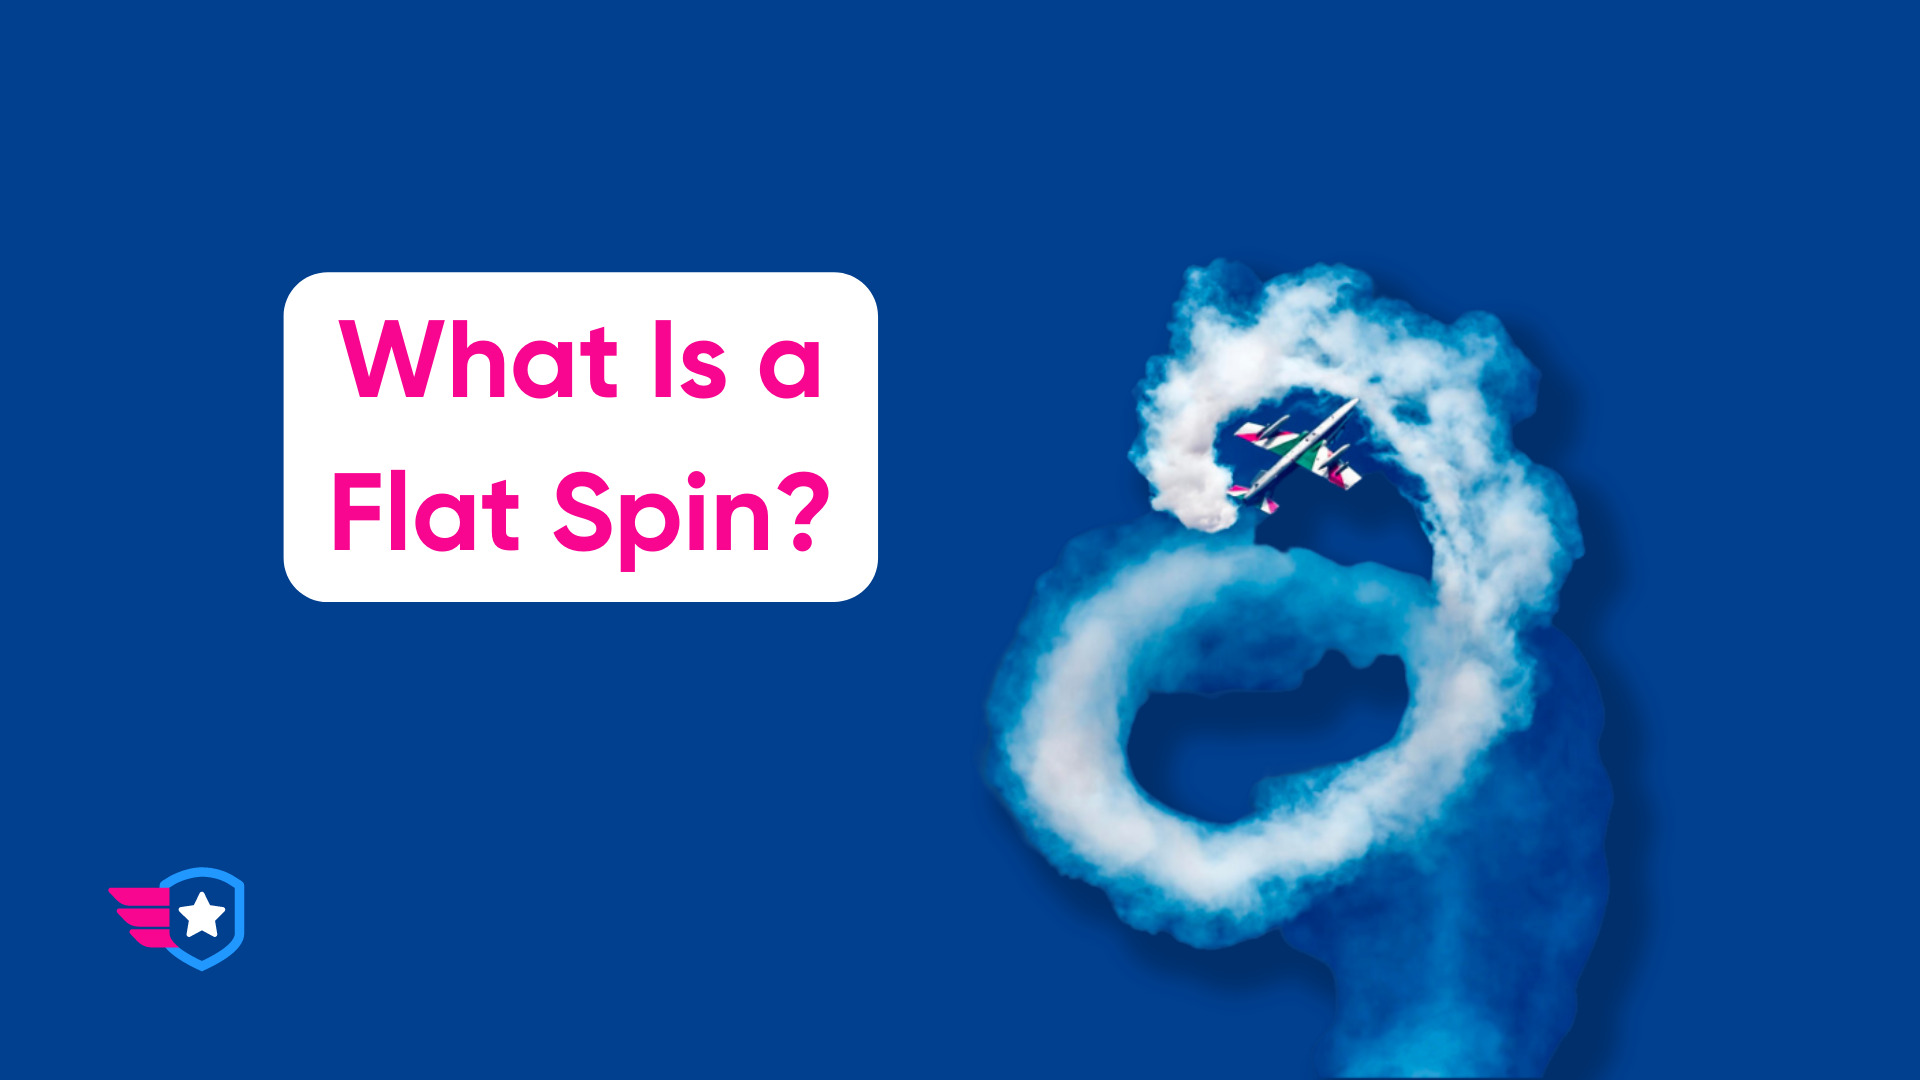 What Is a Flat Spin?